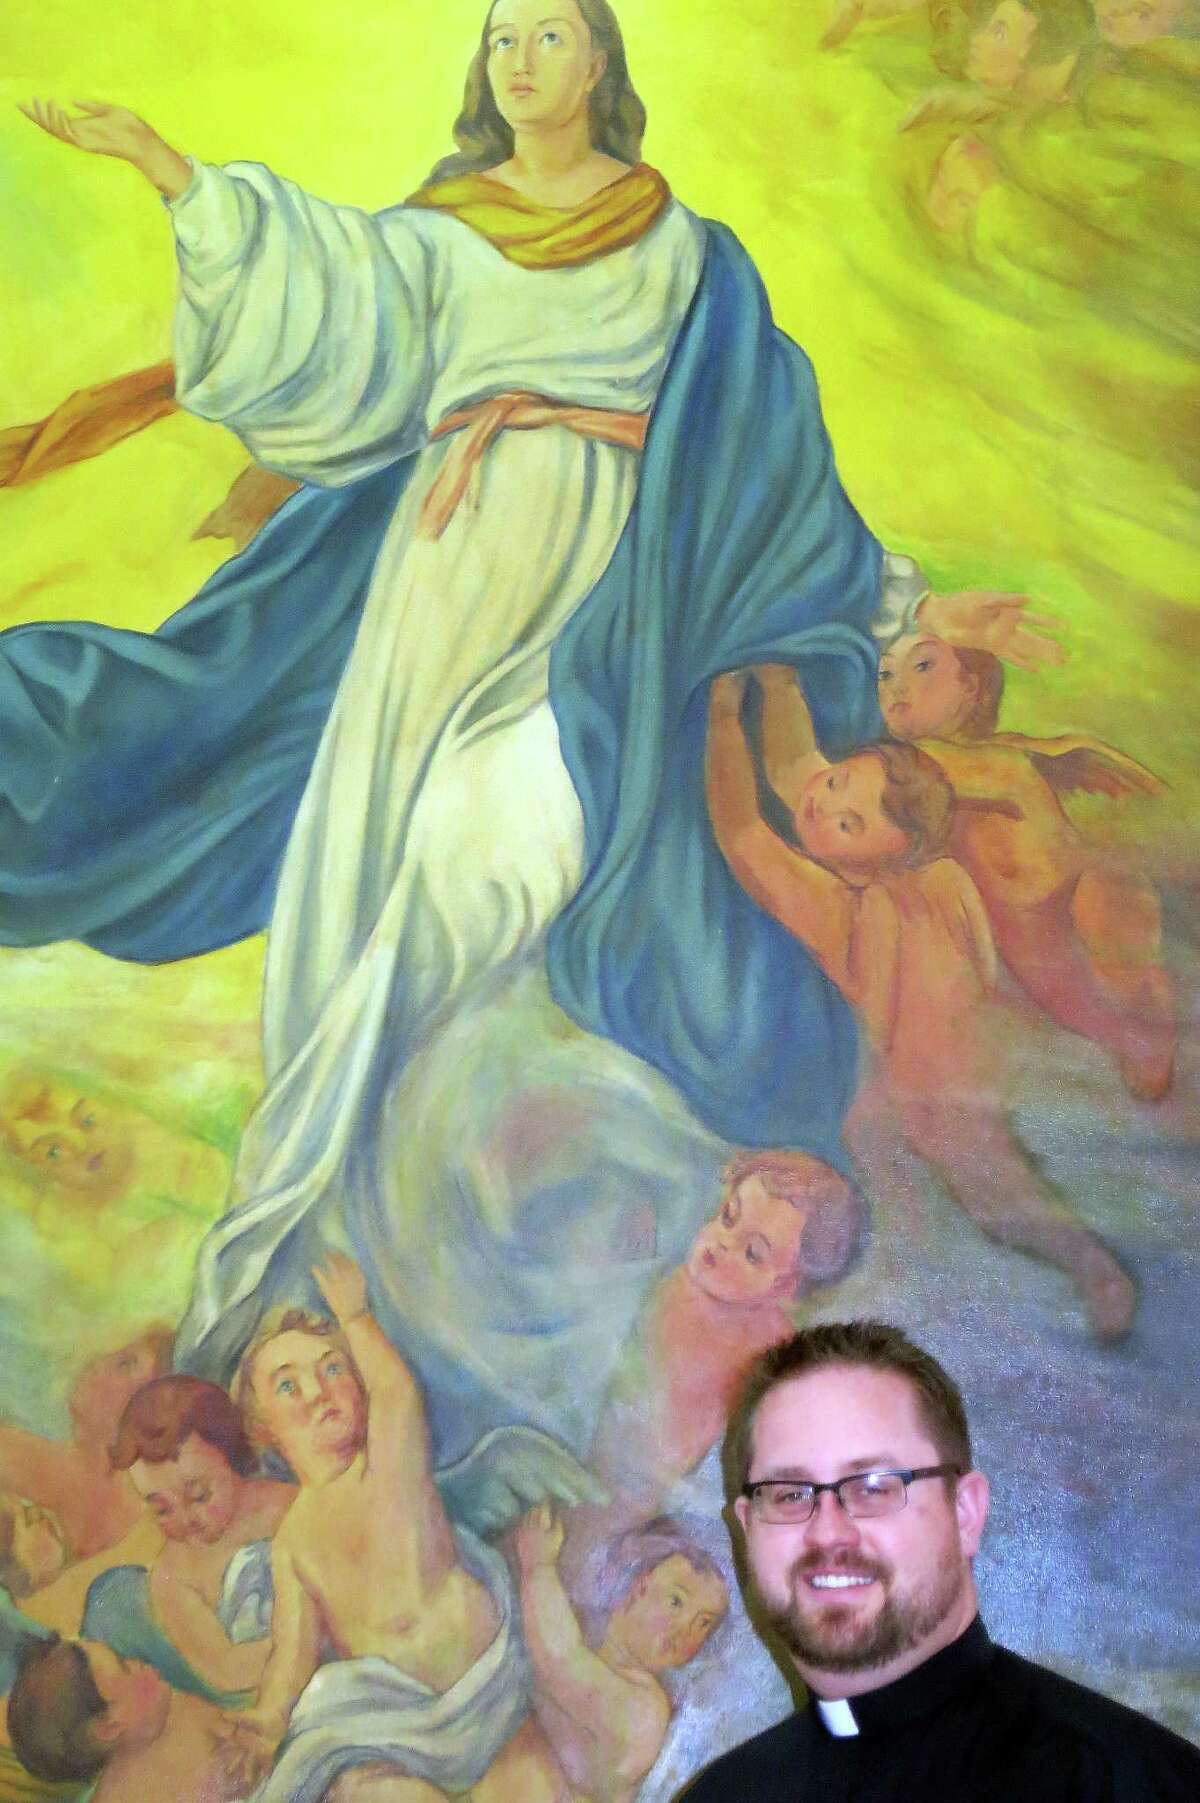 Father Daniel Dreher said the angel on the Assumption painting is modeled after a daughter of one of the Italian POWs. Decades later she visited the church.